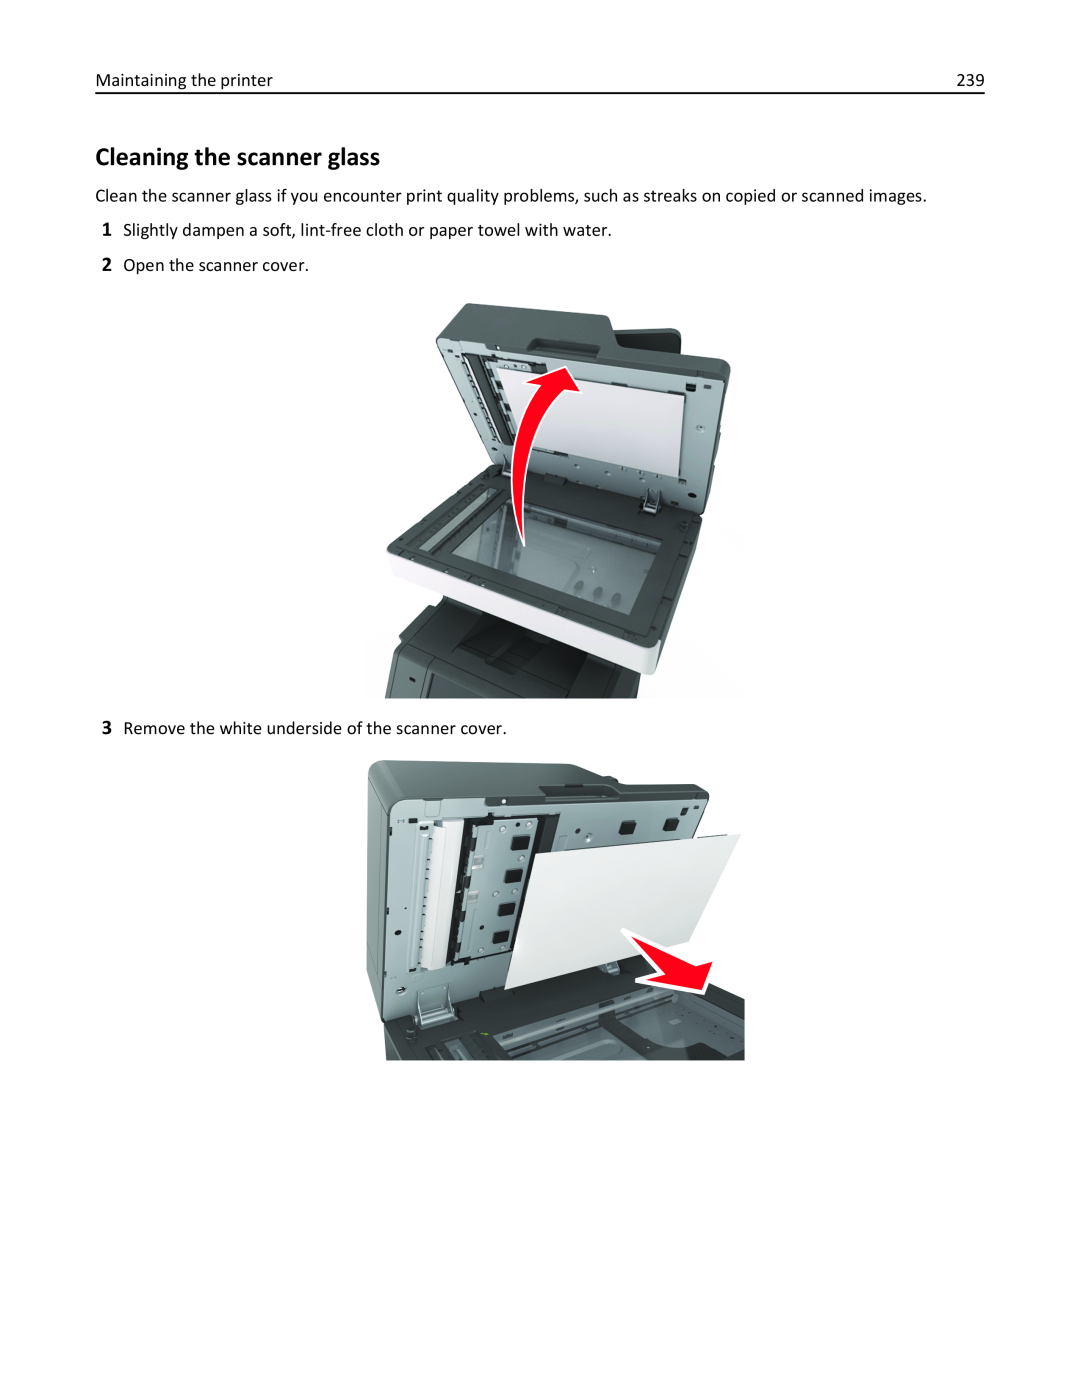 Lexmark 037, MX710DHE, 24T7310, 237 manual Cleaning the scanner glass, Maintaining the printer, Open the scanner cover 